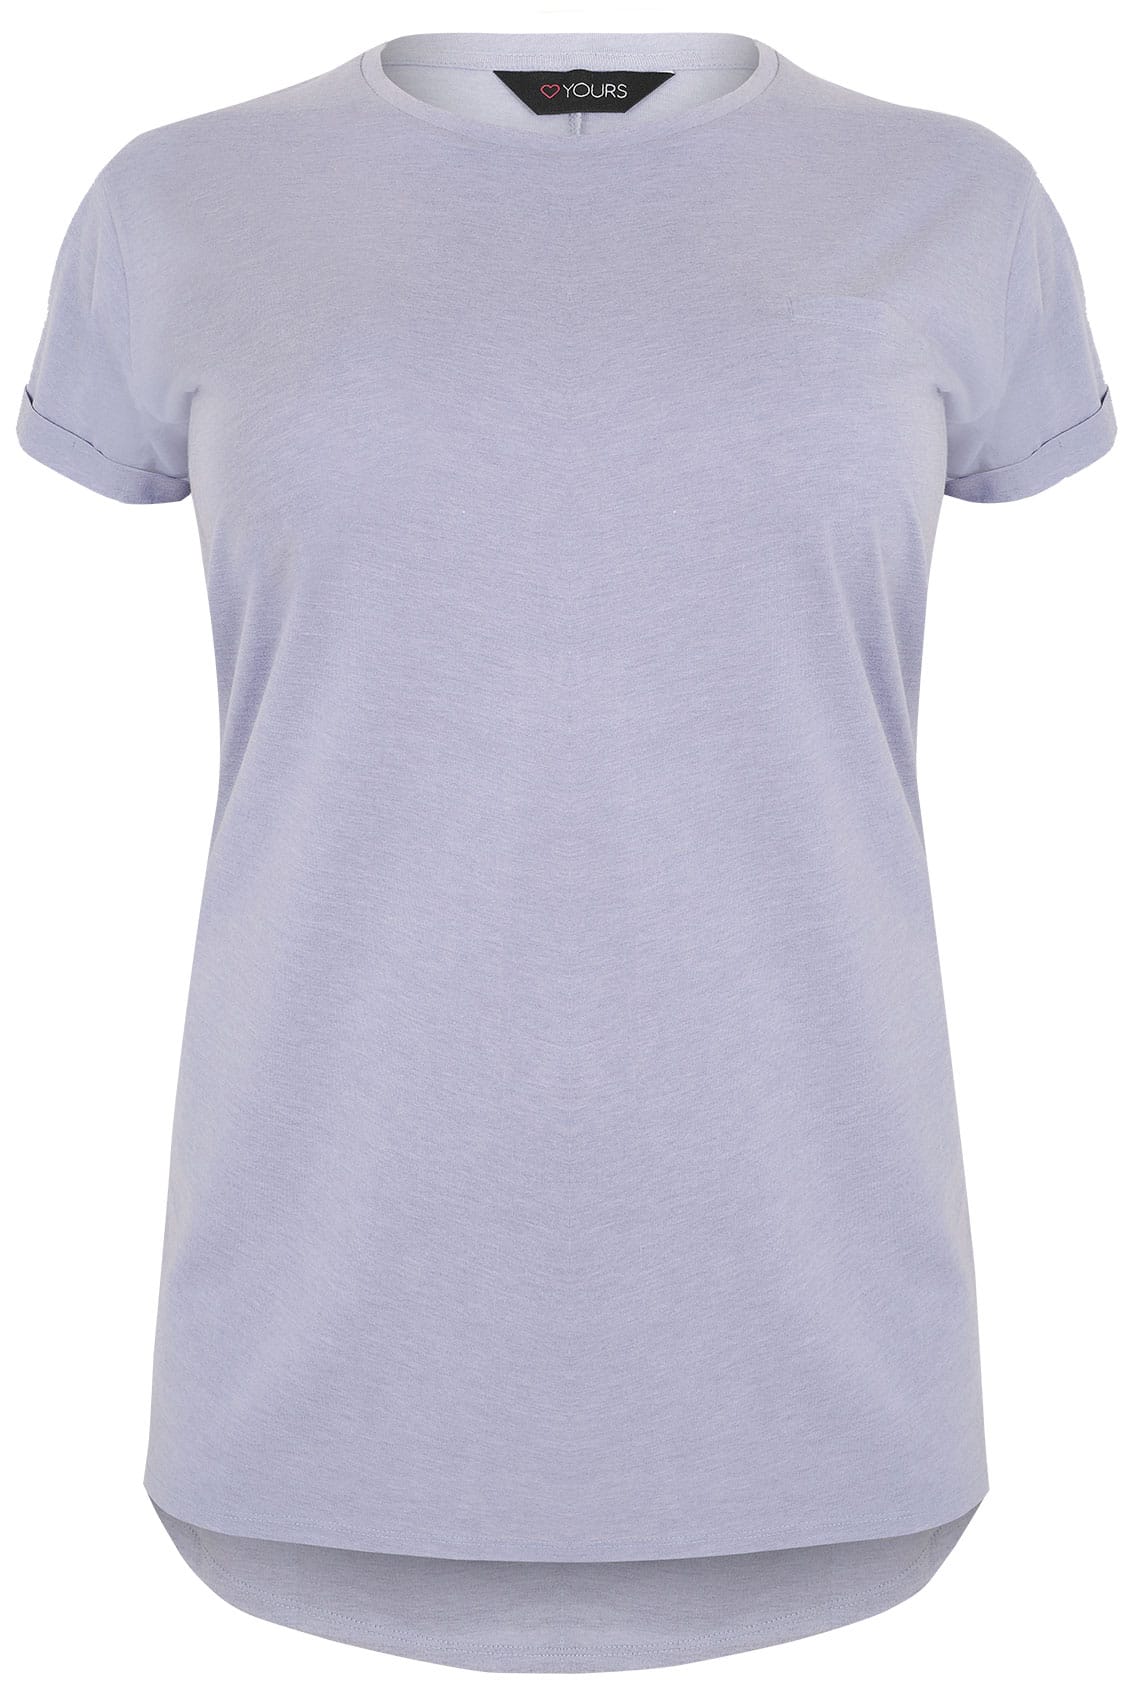 White Pocket T-Shirt With Curved Hem, Plus size 16 to 36 